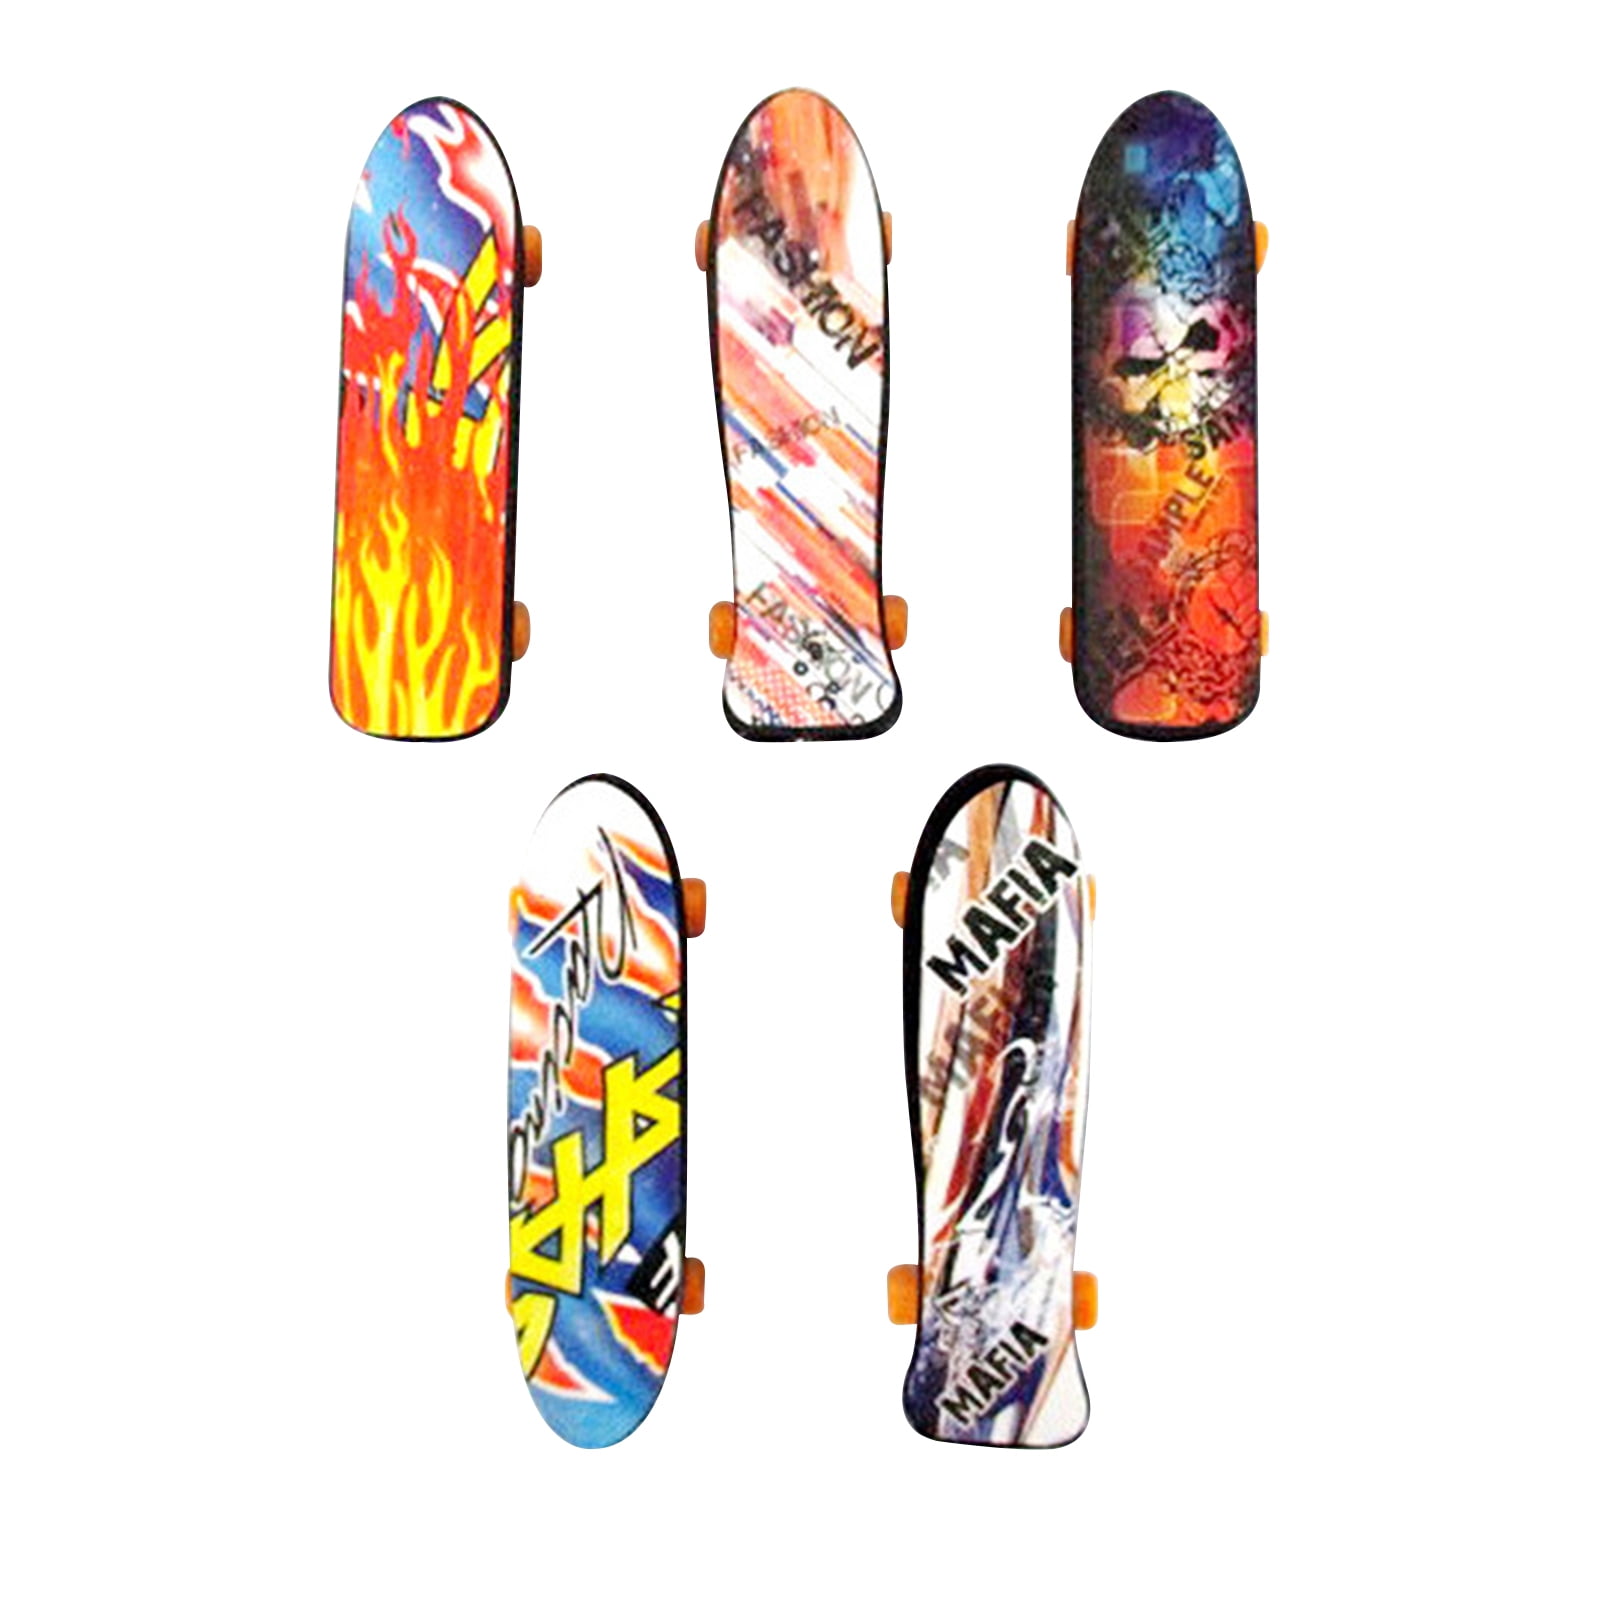 Mini Fingerboard Boys Kids Funny Skateboard Toys Decoration for Party Favors 